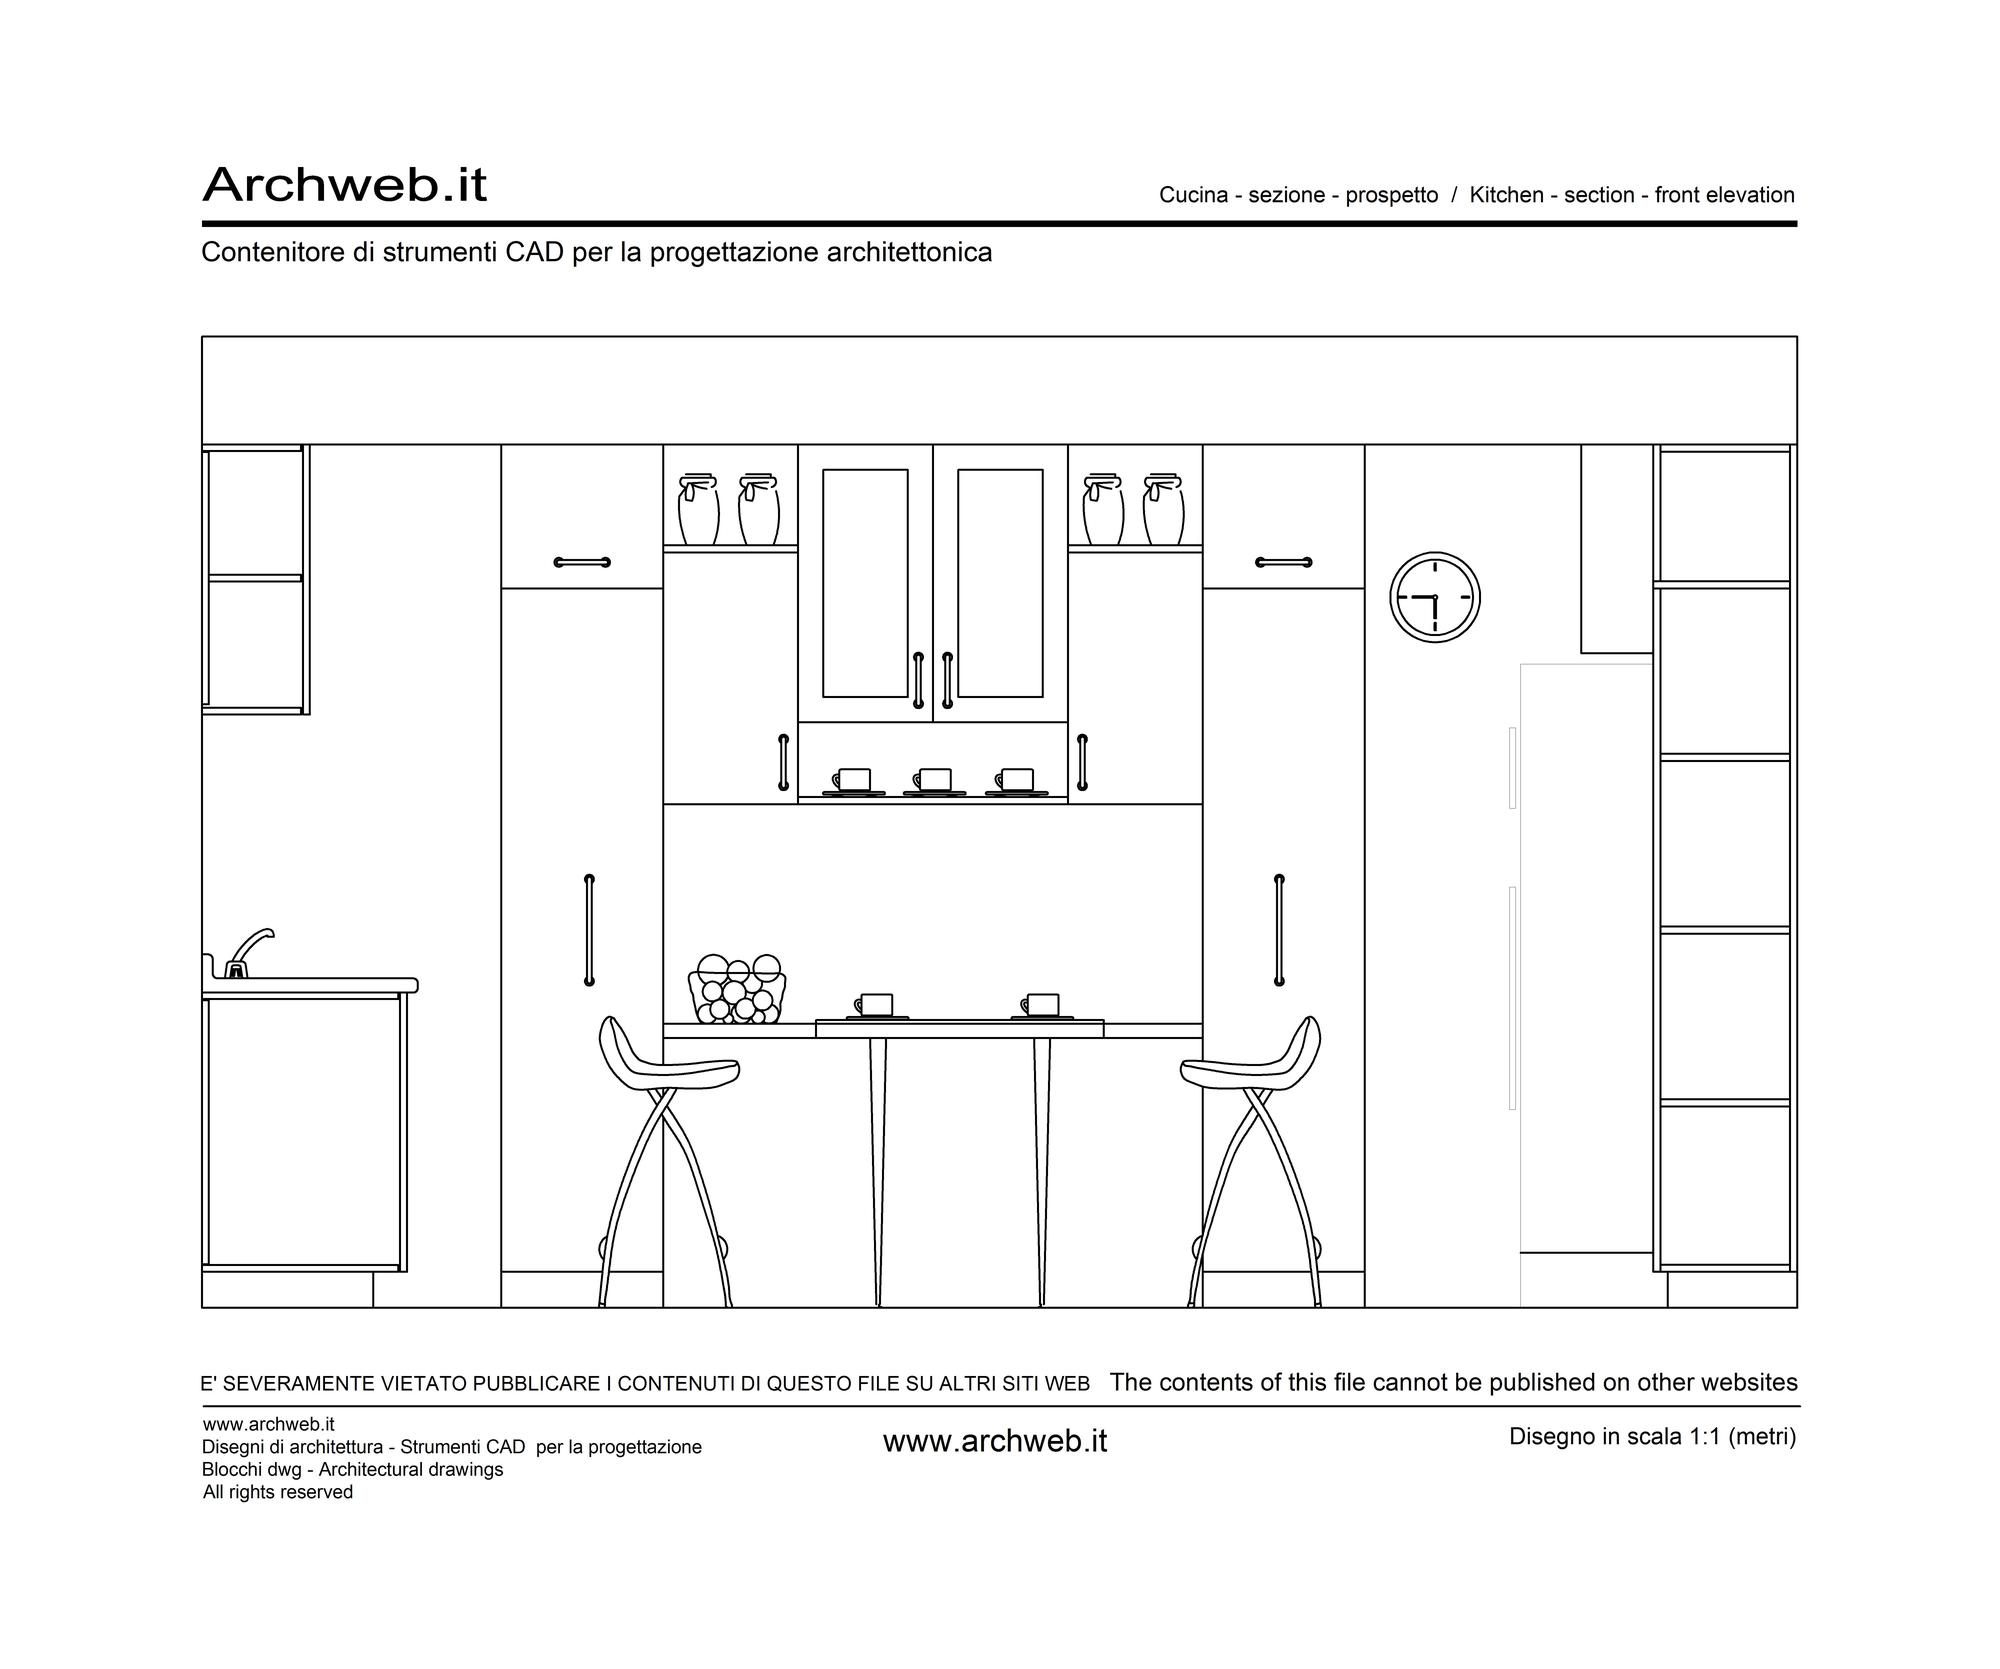 Elevation drawing of a kitchen